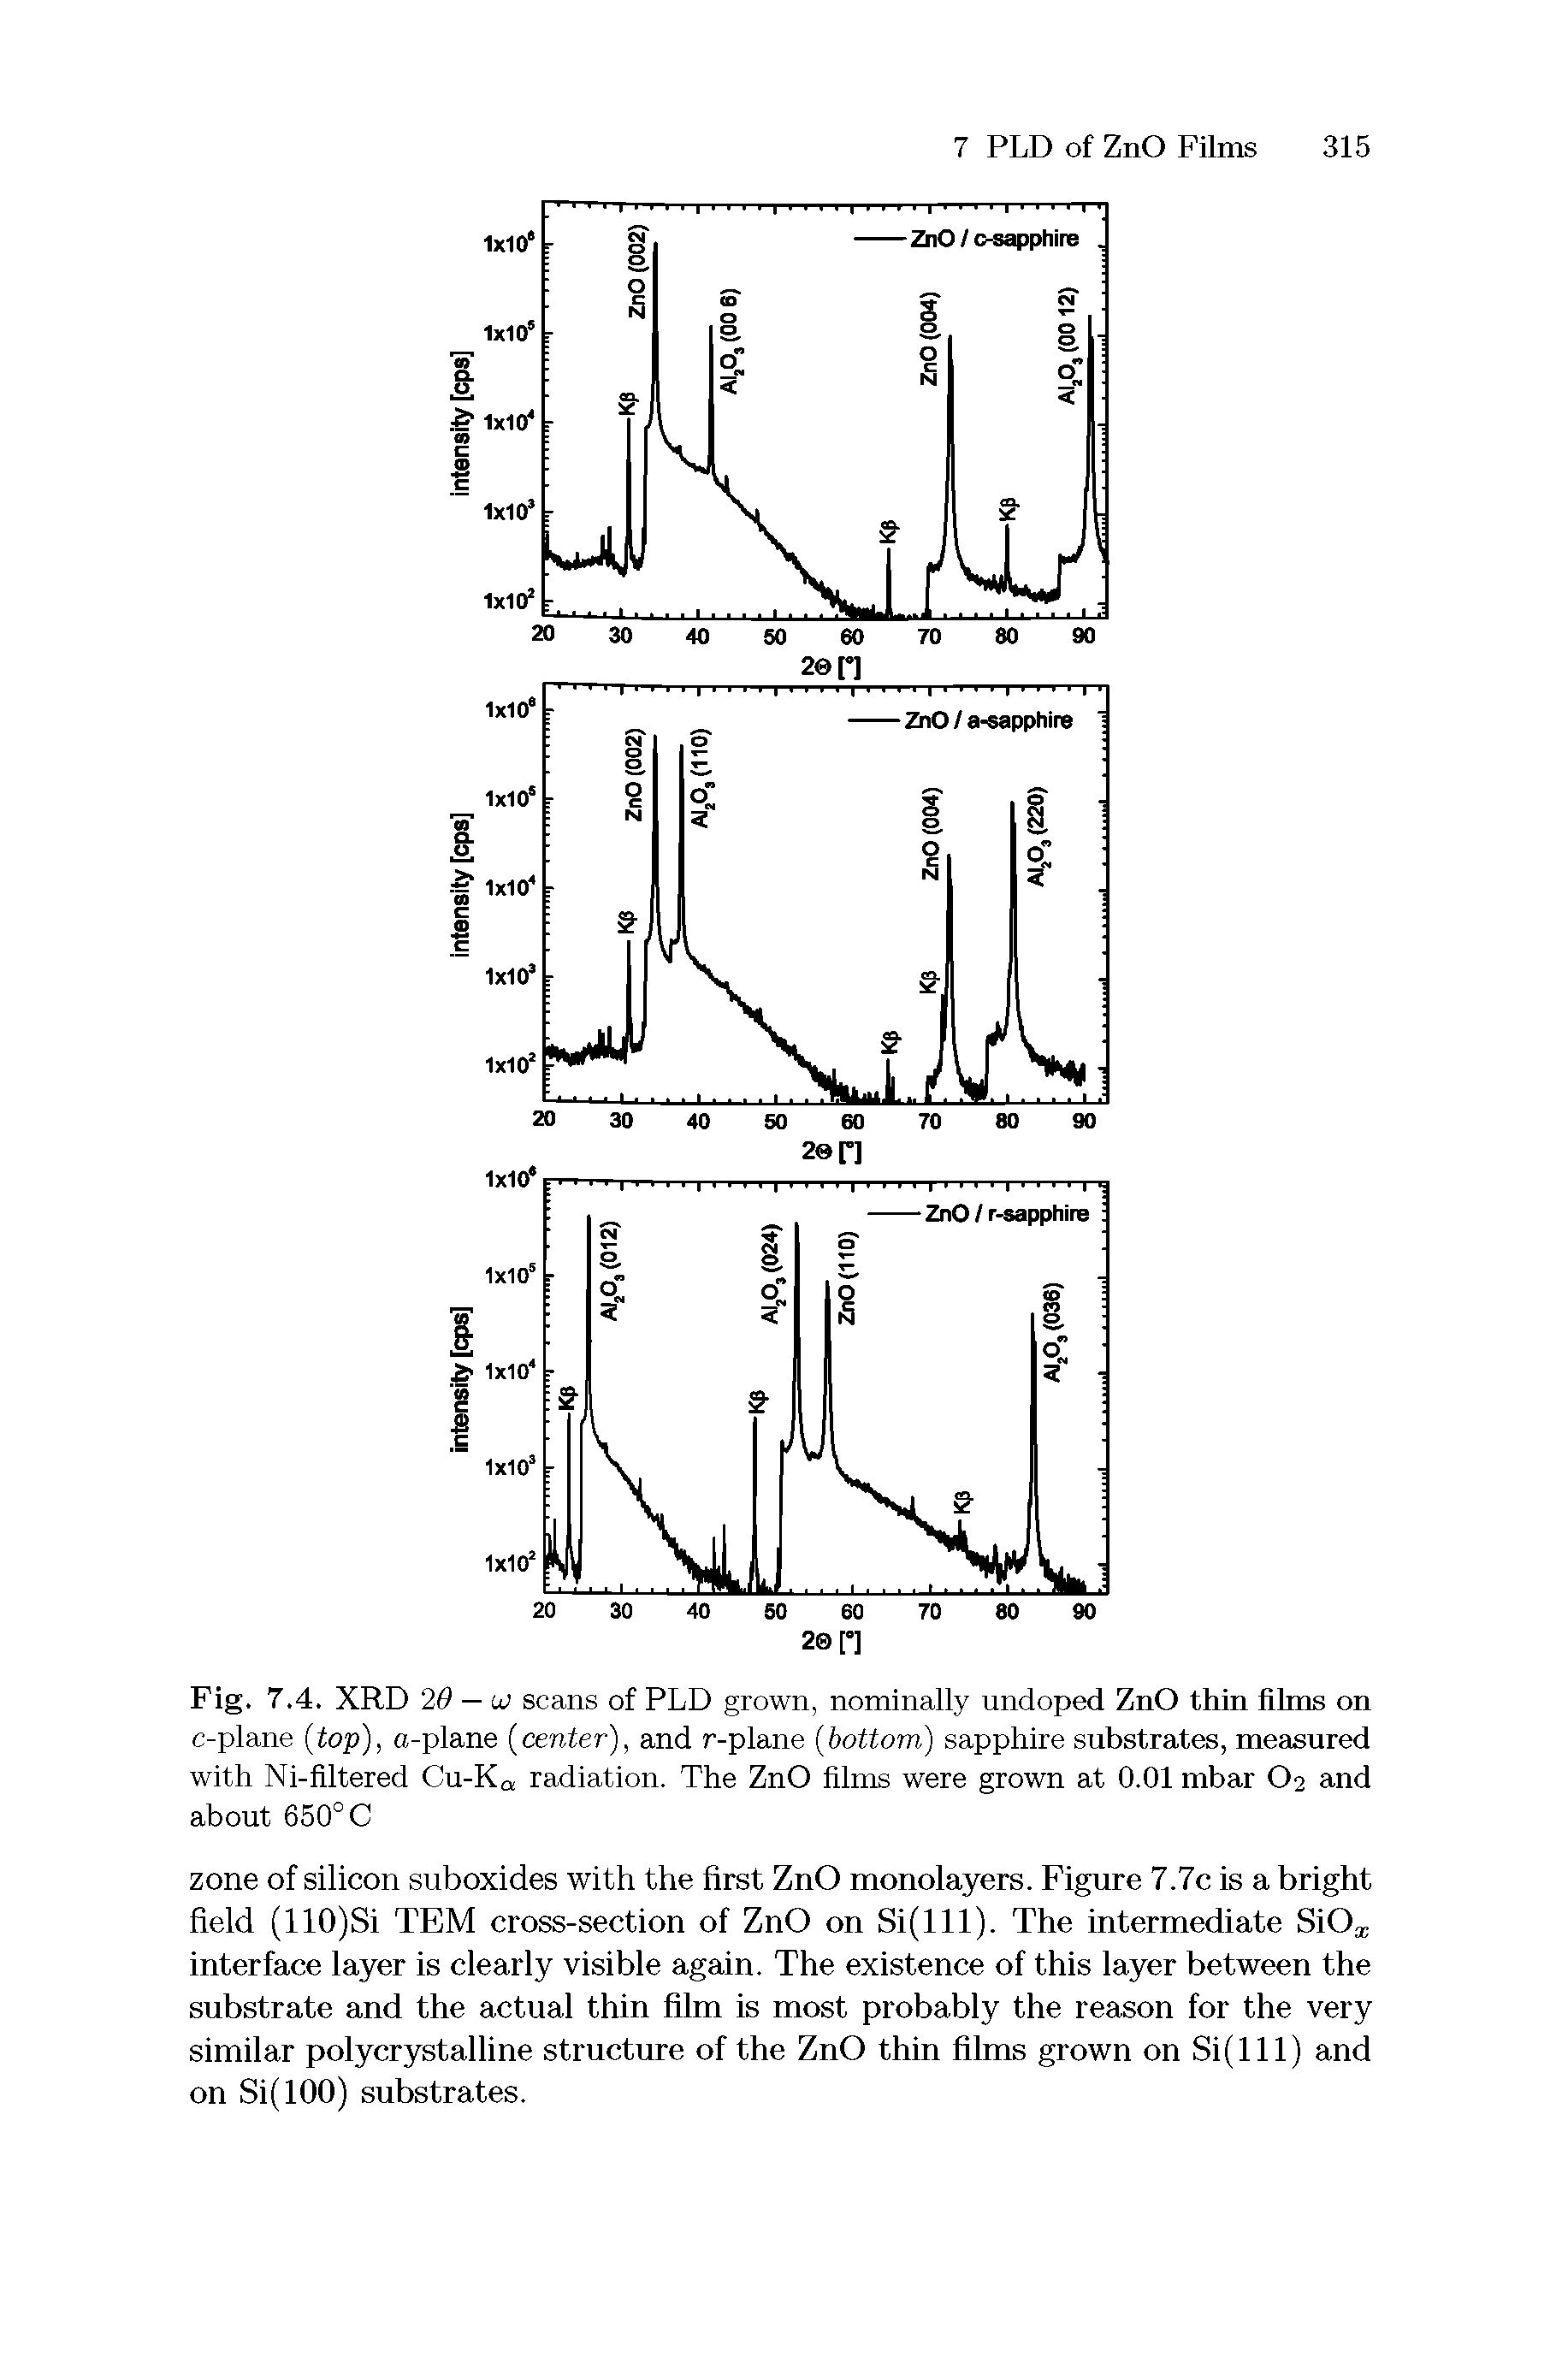 Fig. 7.4. XRD 20 — io scans of PLD grown, nominally undoped ZnO thin films on c-plane (top), a-plane (center), and r-plane (bottom,) sapphire substrates, measured with Ni-filtered Cu-Ko, radiation. The ZnO films were grown at 0.01 mbar O2 and about 650° C...